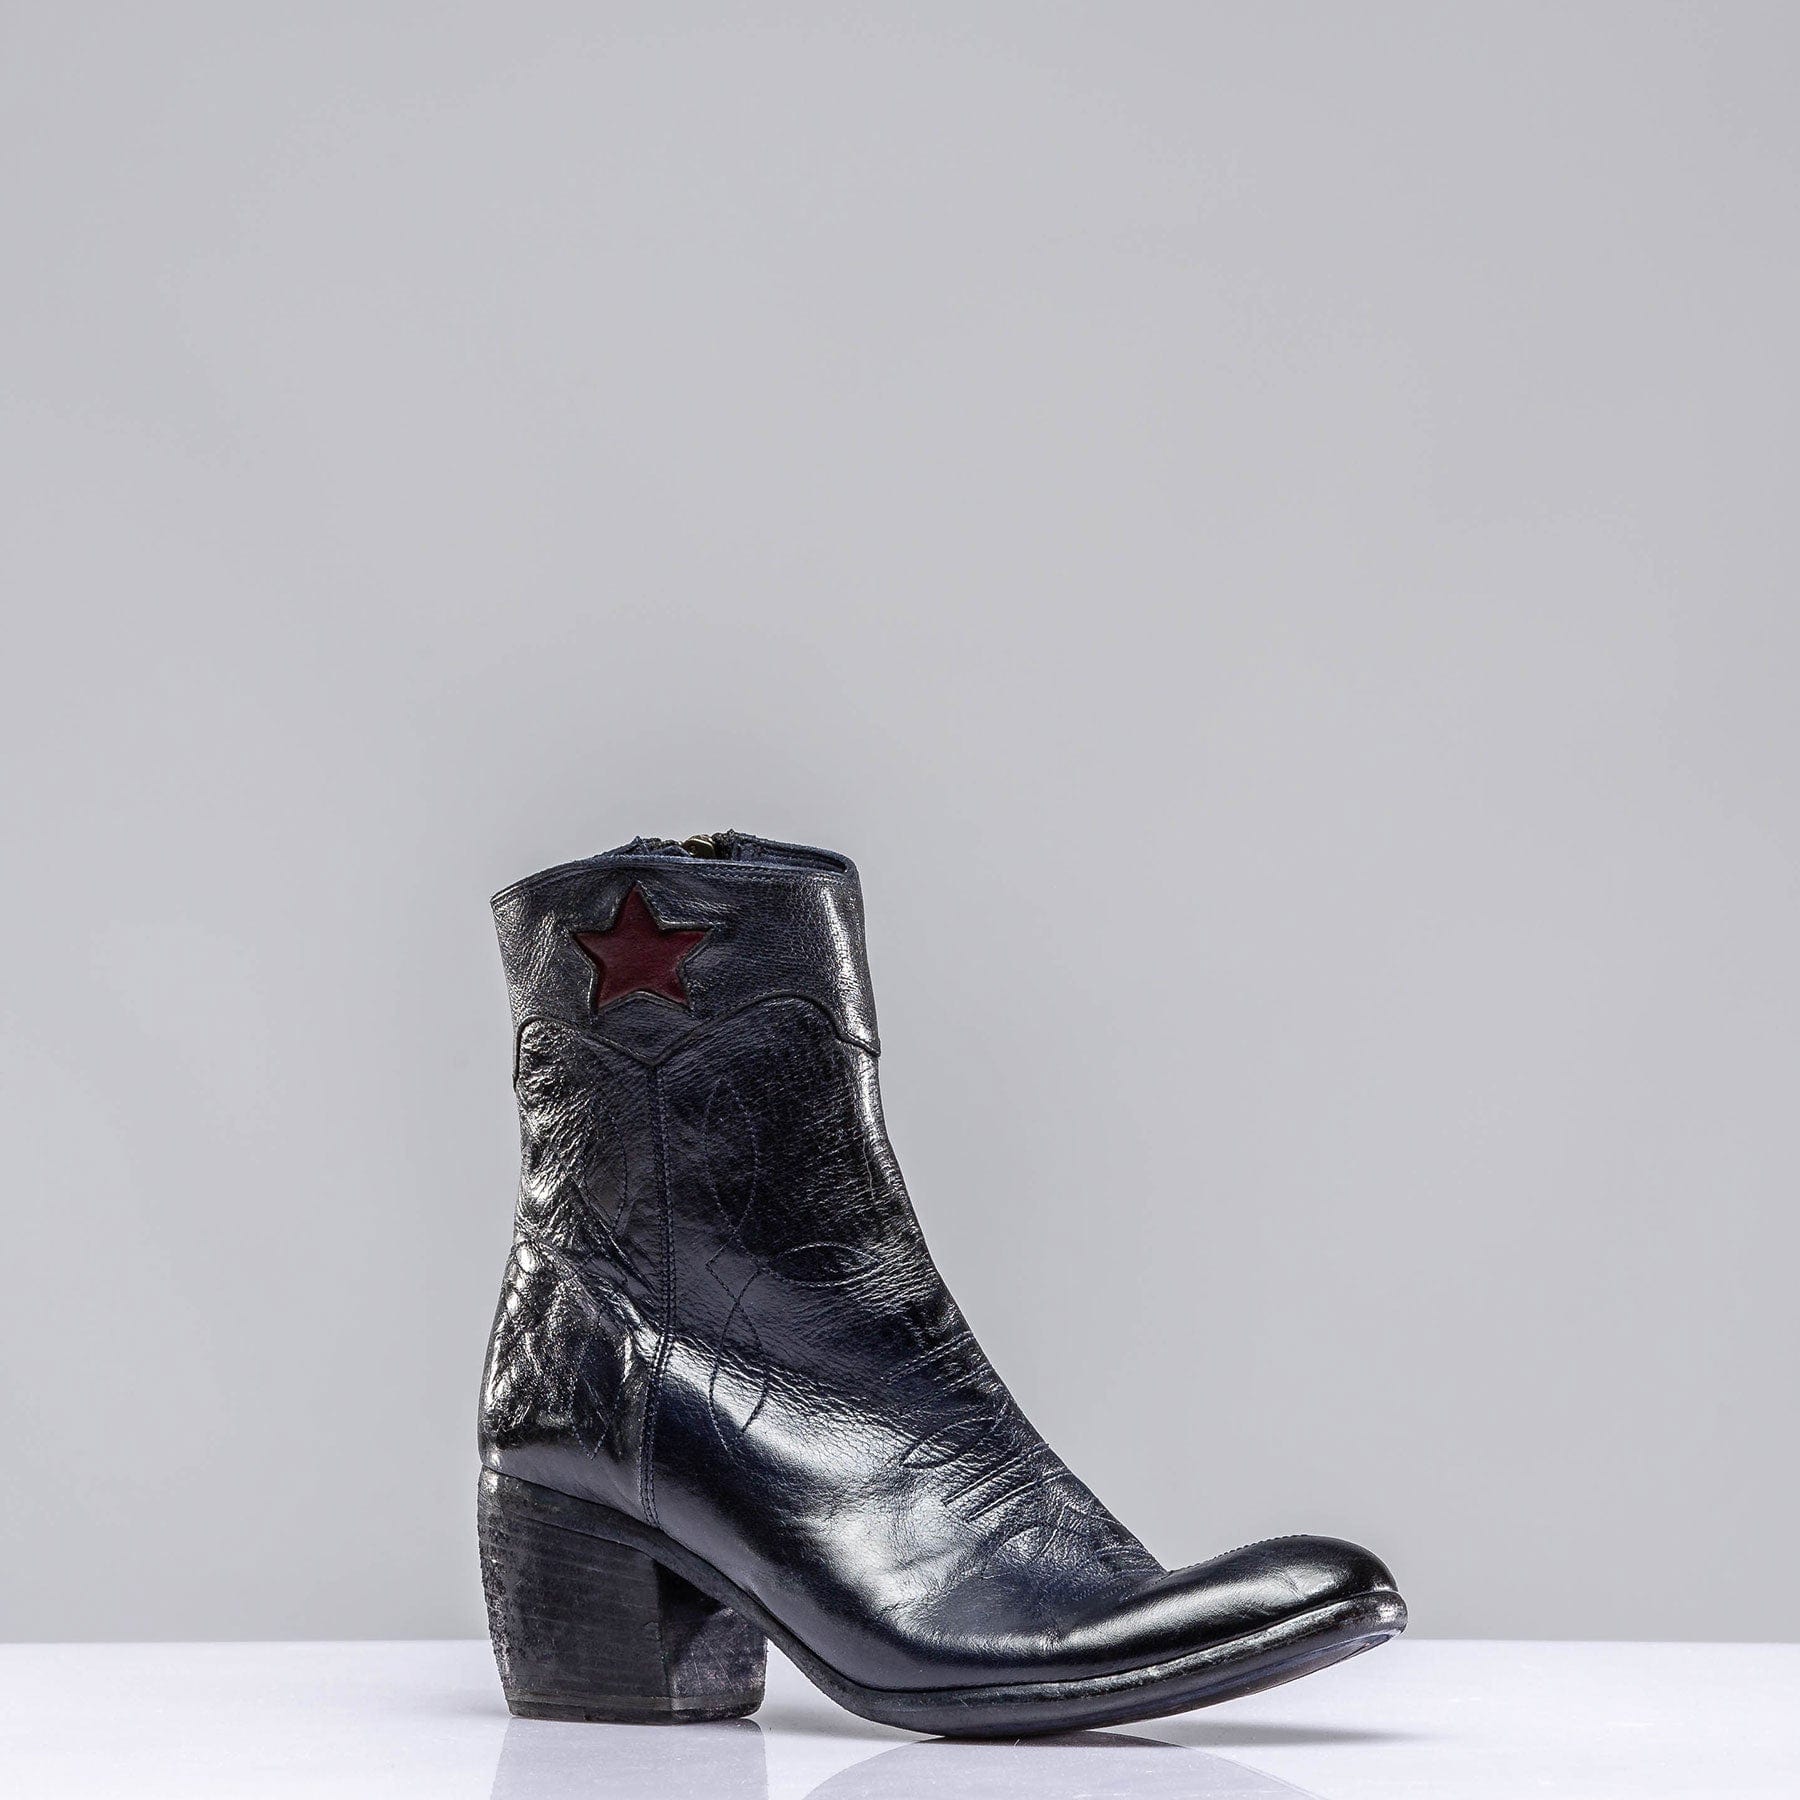 Stella Navy Boot W/ Red Star - AXEL'S